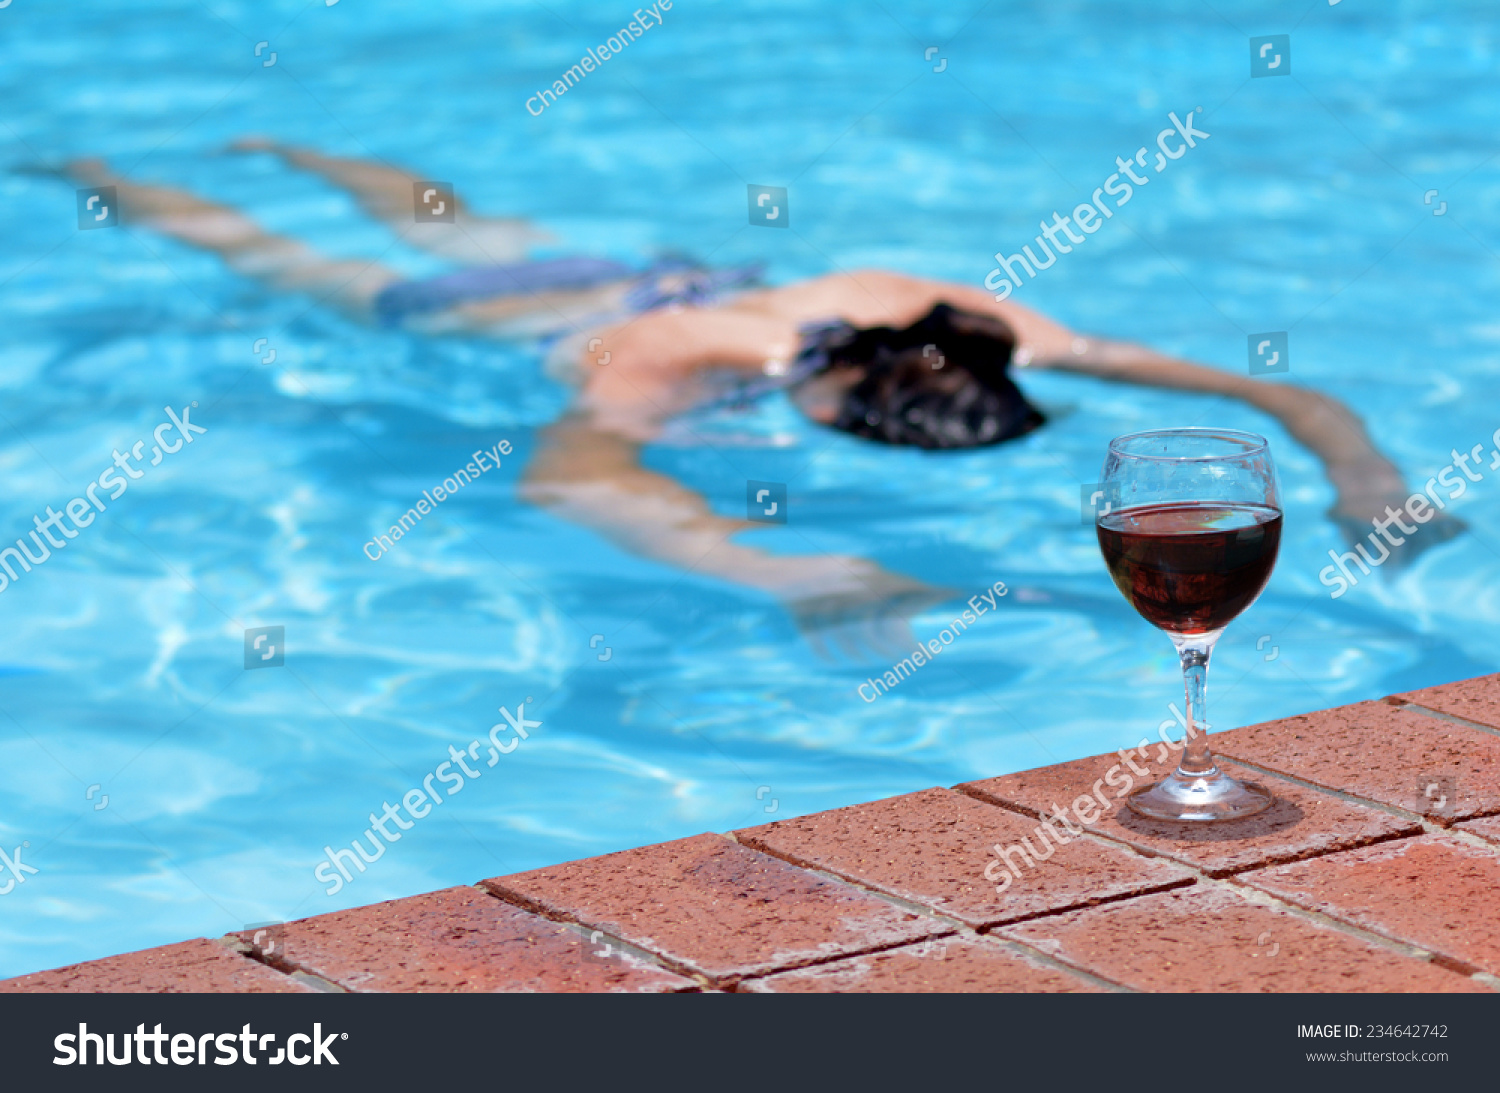 stock-photo-a-cup-of-red-wine-on-a-pool-side-with-drunk-drowning-person-woman-in-a-swimming-pool-at-the-234642742.jpg